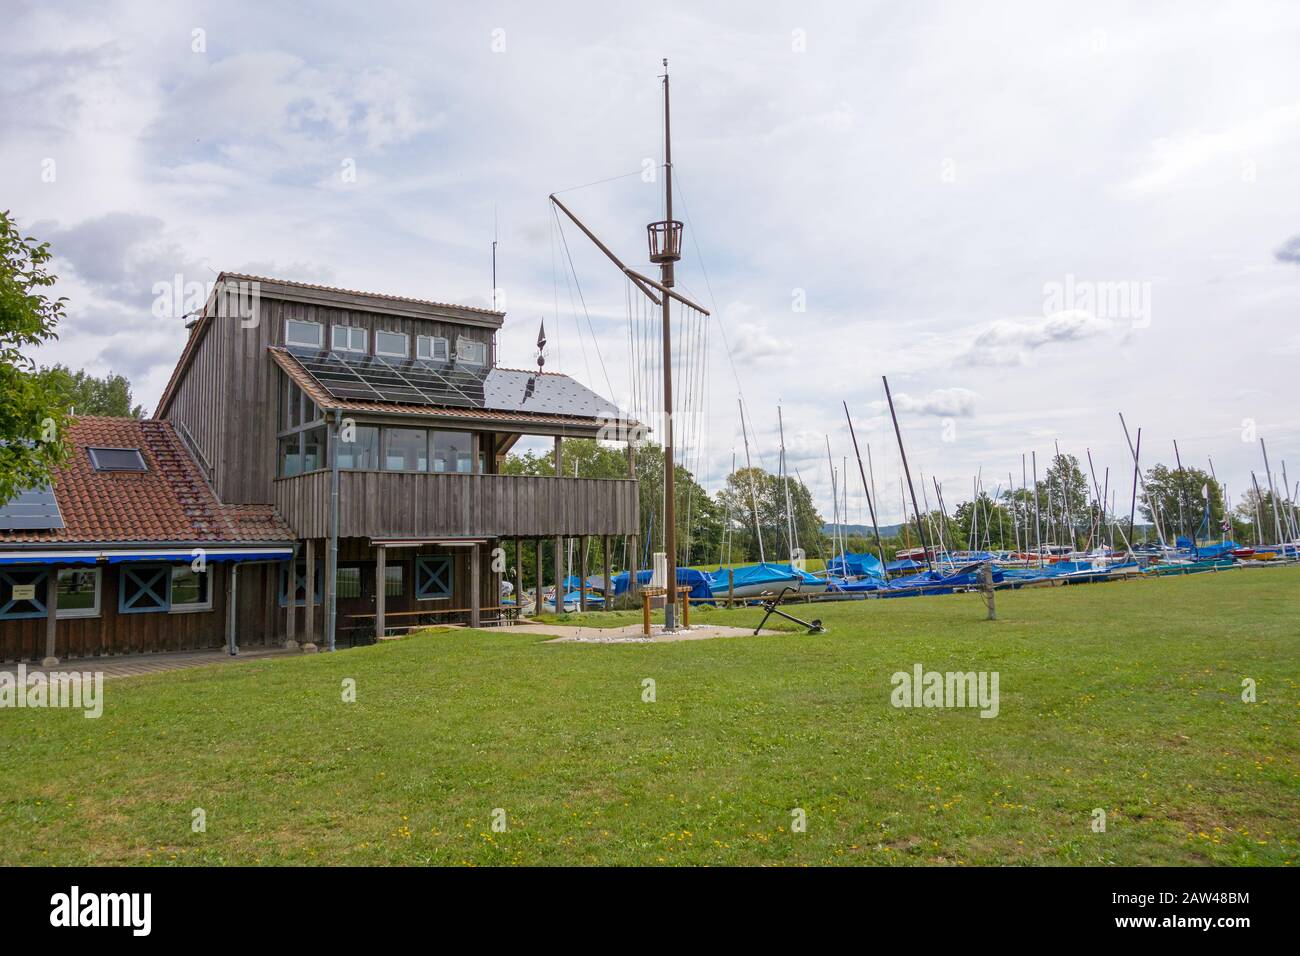 Muhr, Germany - August 18, 2014: ATSC Altmuehltal-Sailing-Club hous at Altmuehlsee in the Fraenkisches Seenland, a famous tourist destination. Stock Photo